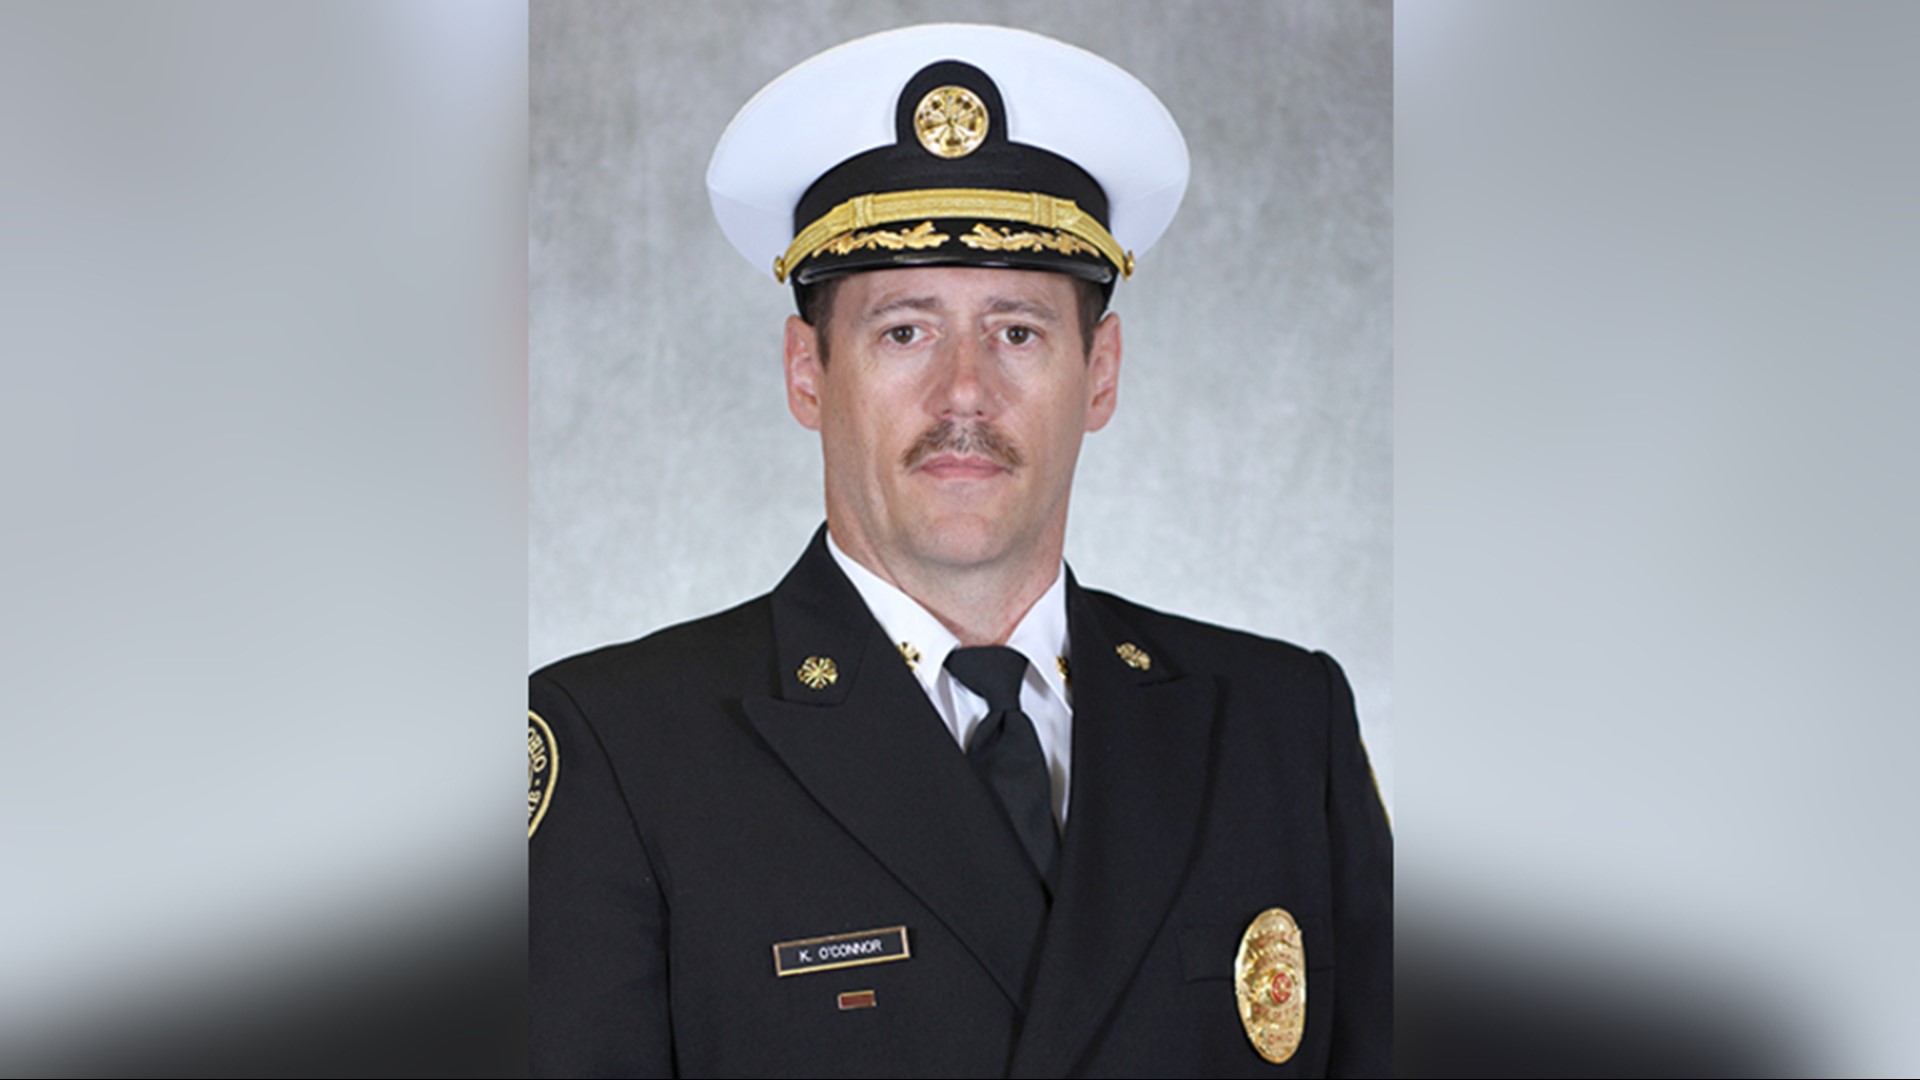 Columbus fire chief to resign in May